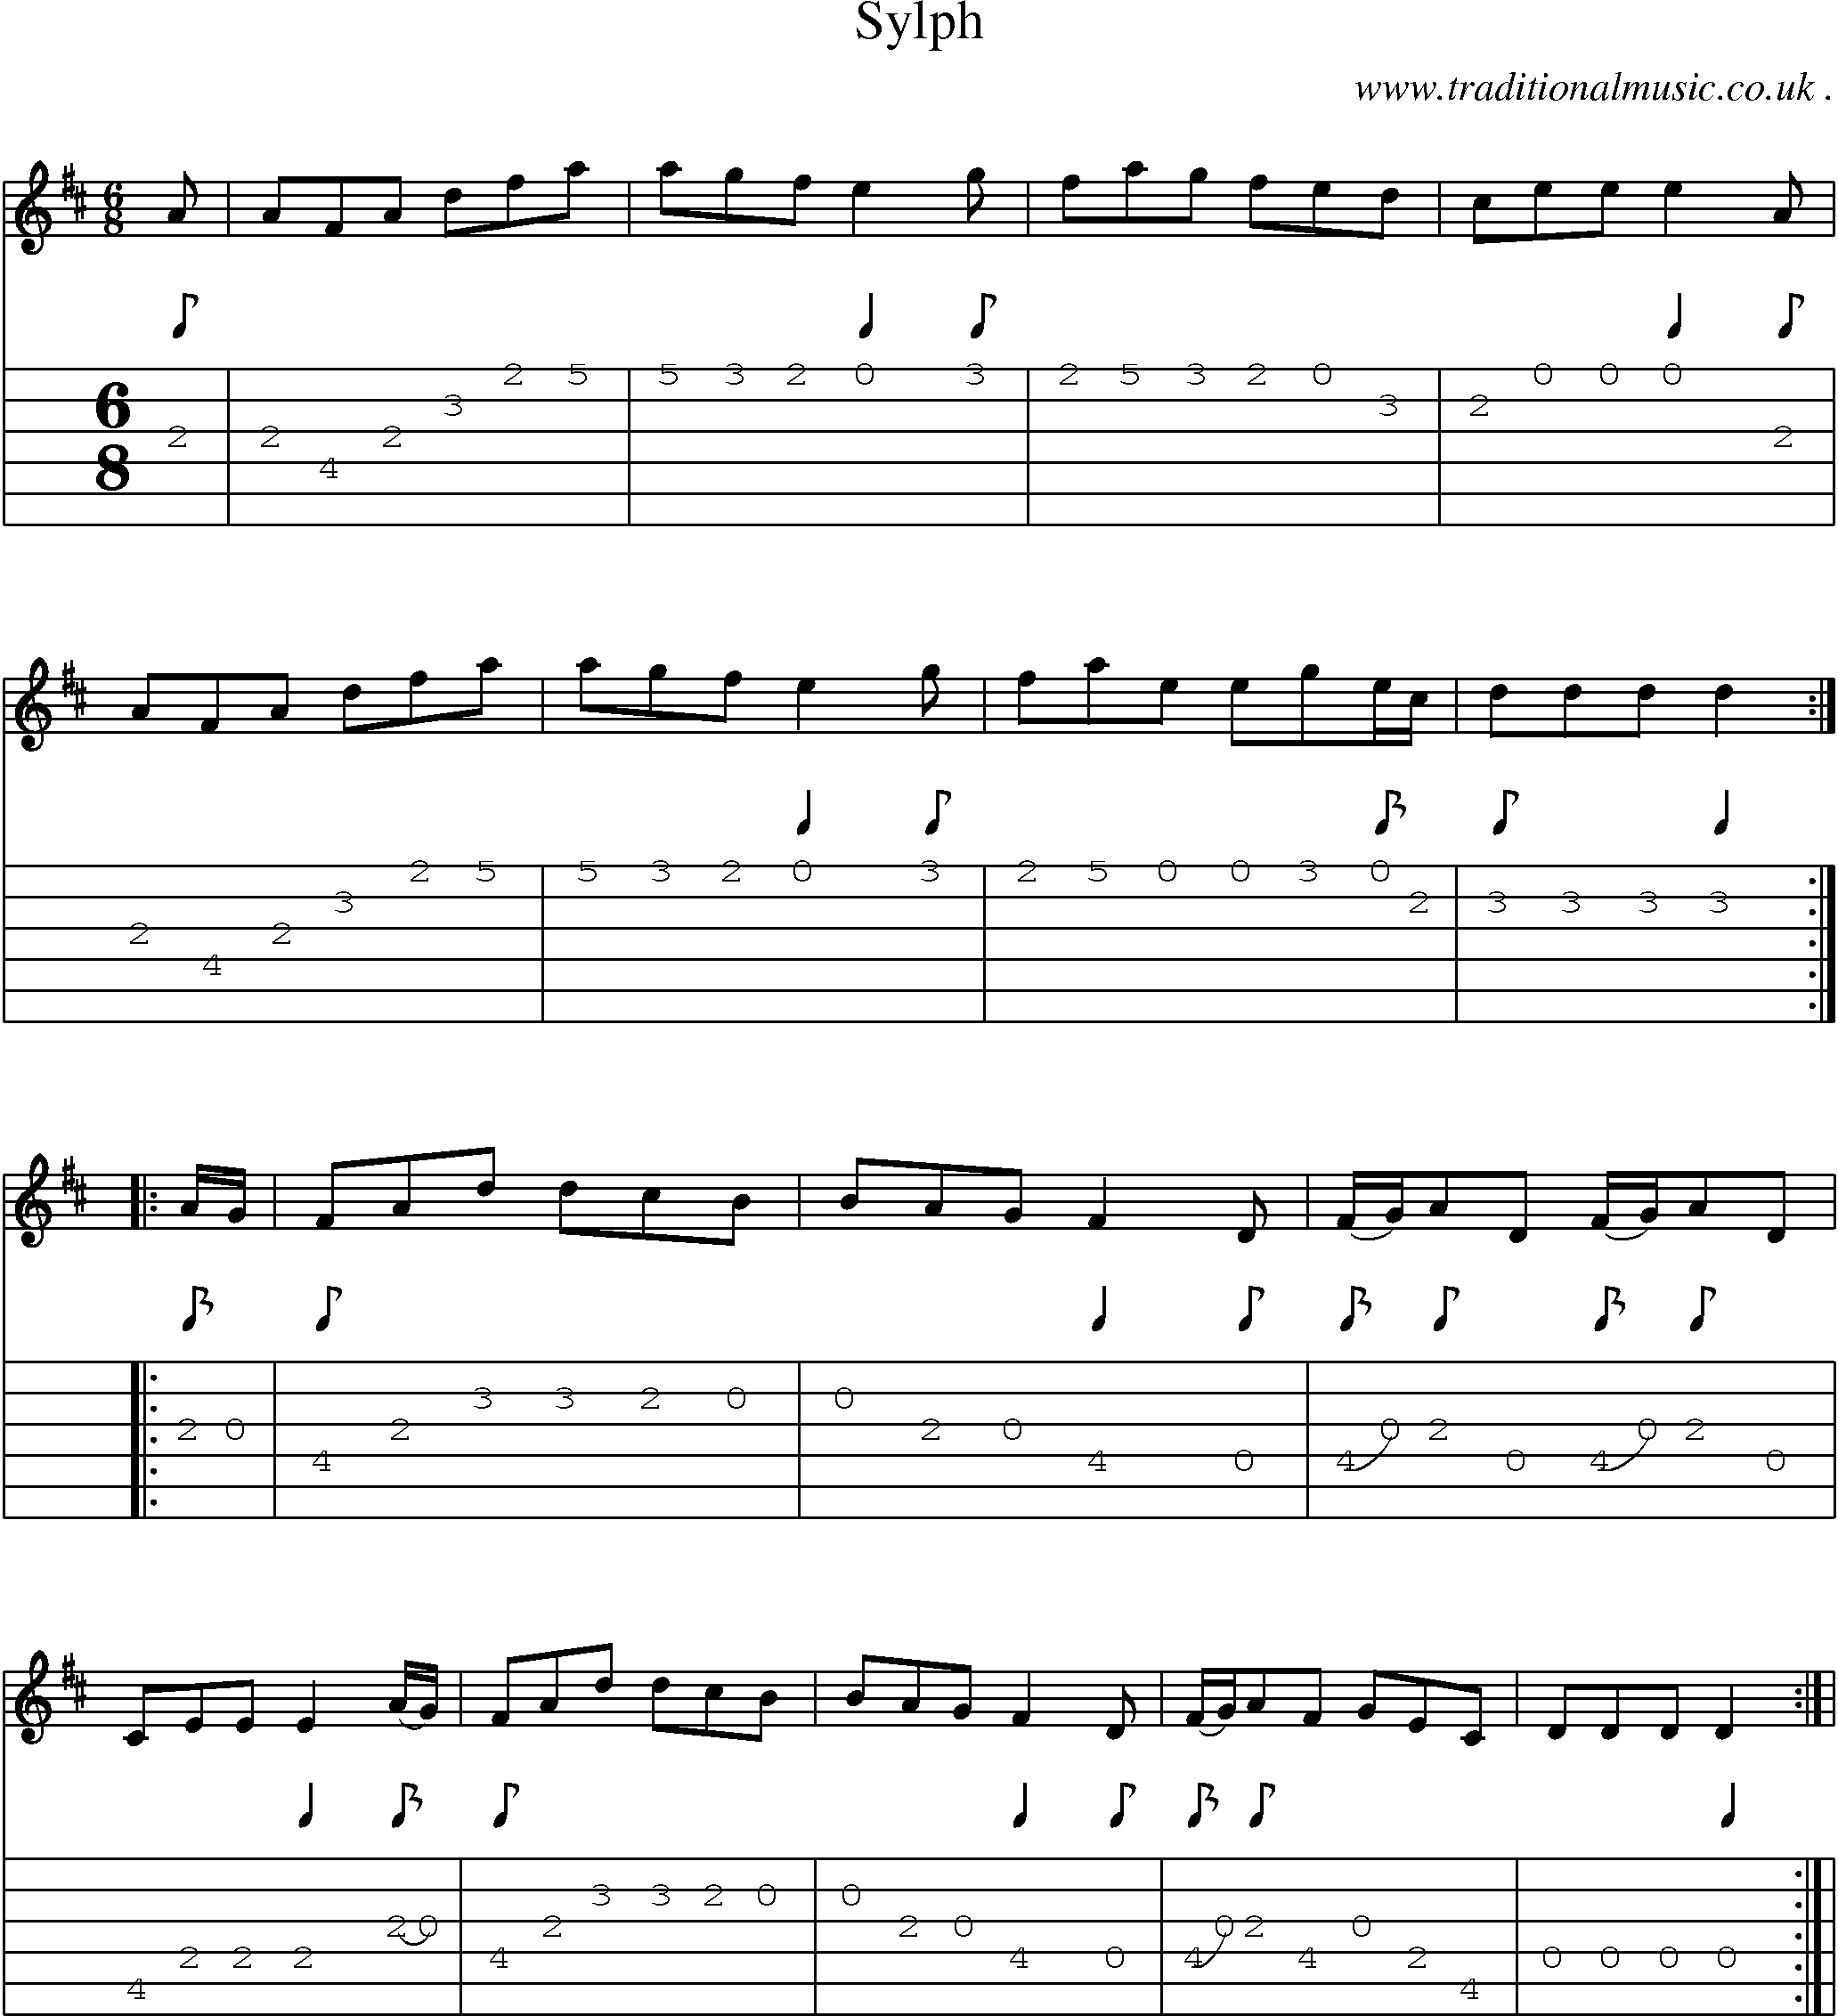 Sheet-Music and Guitar Tabs for Sylph